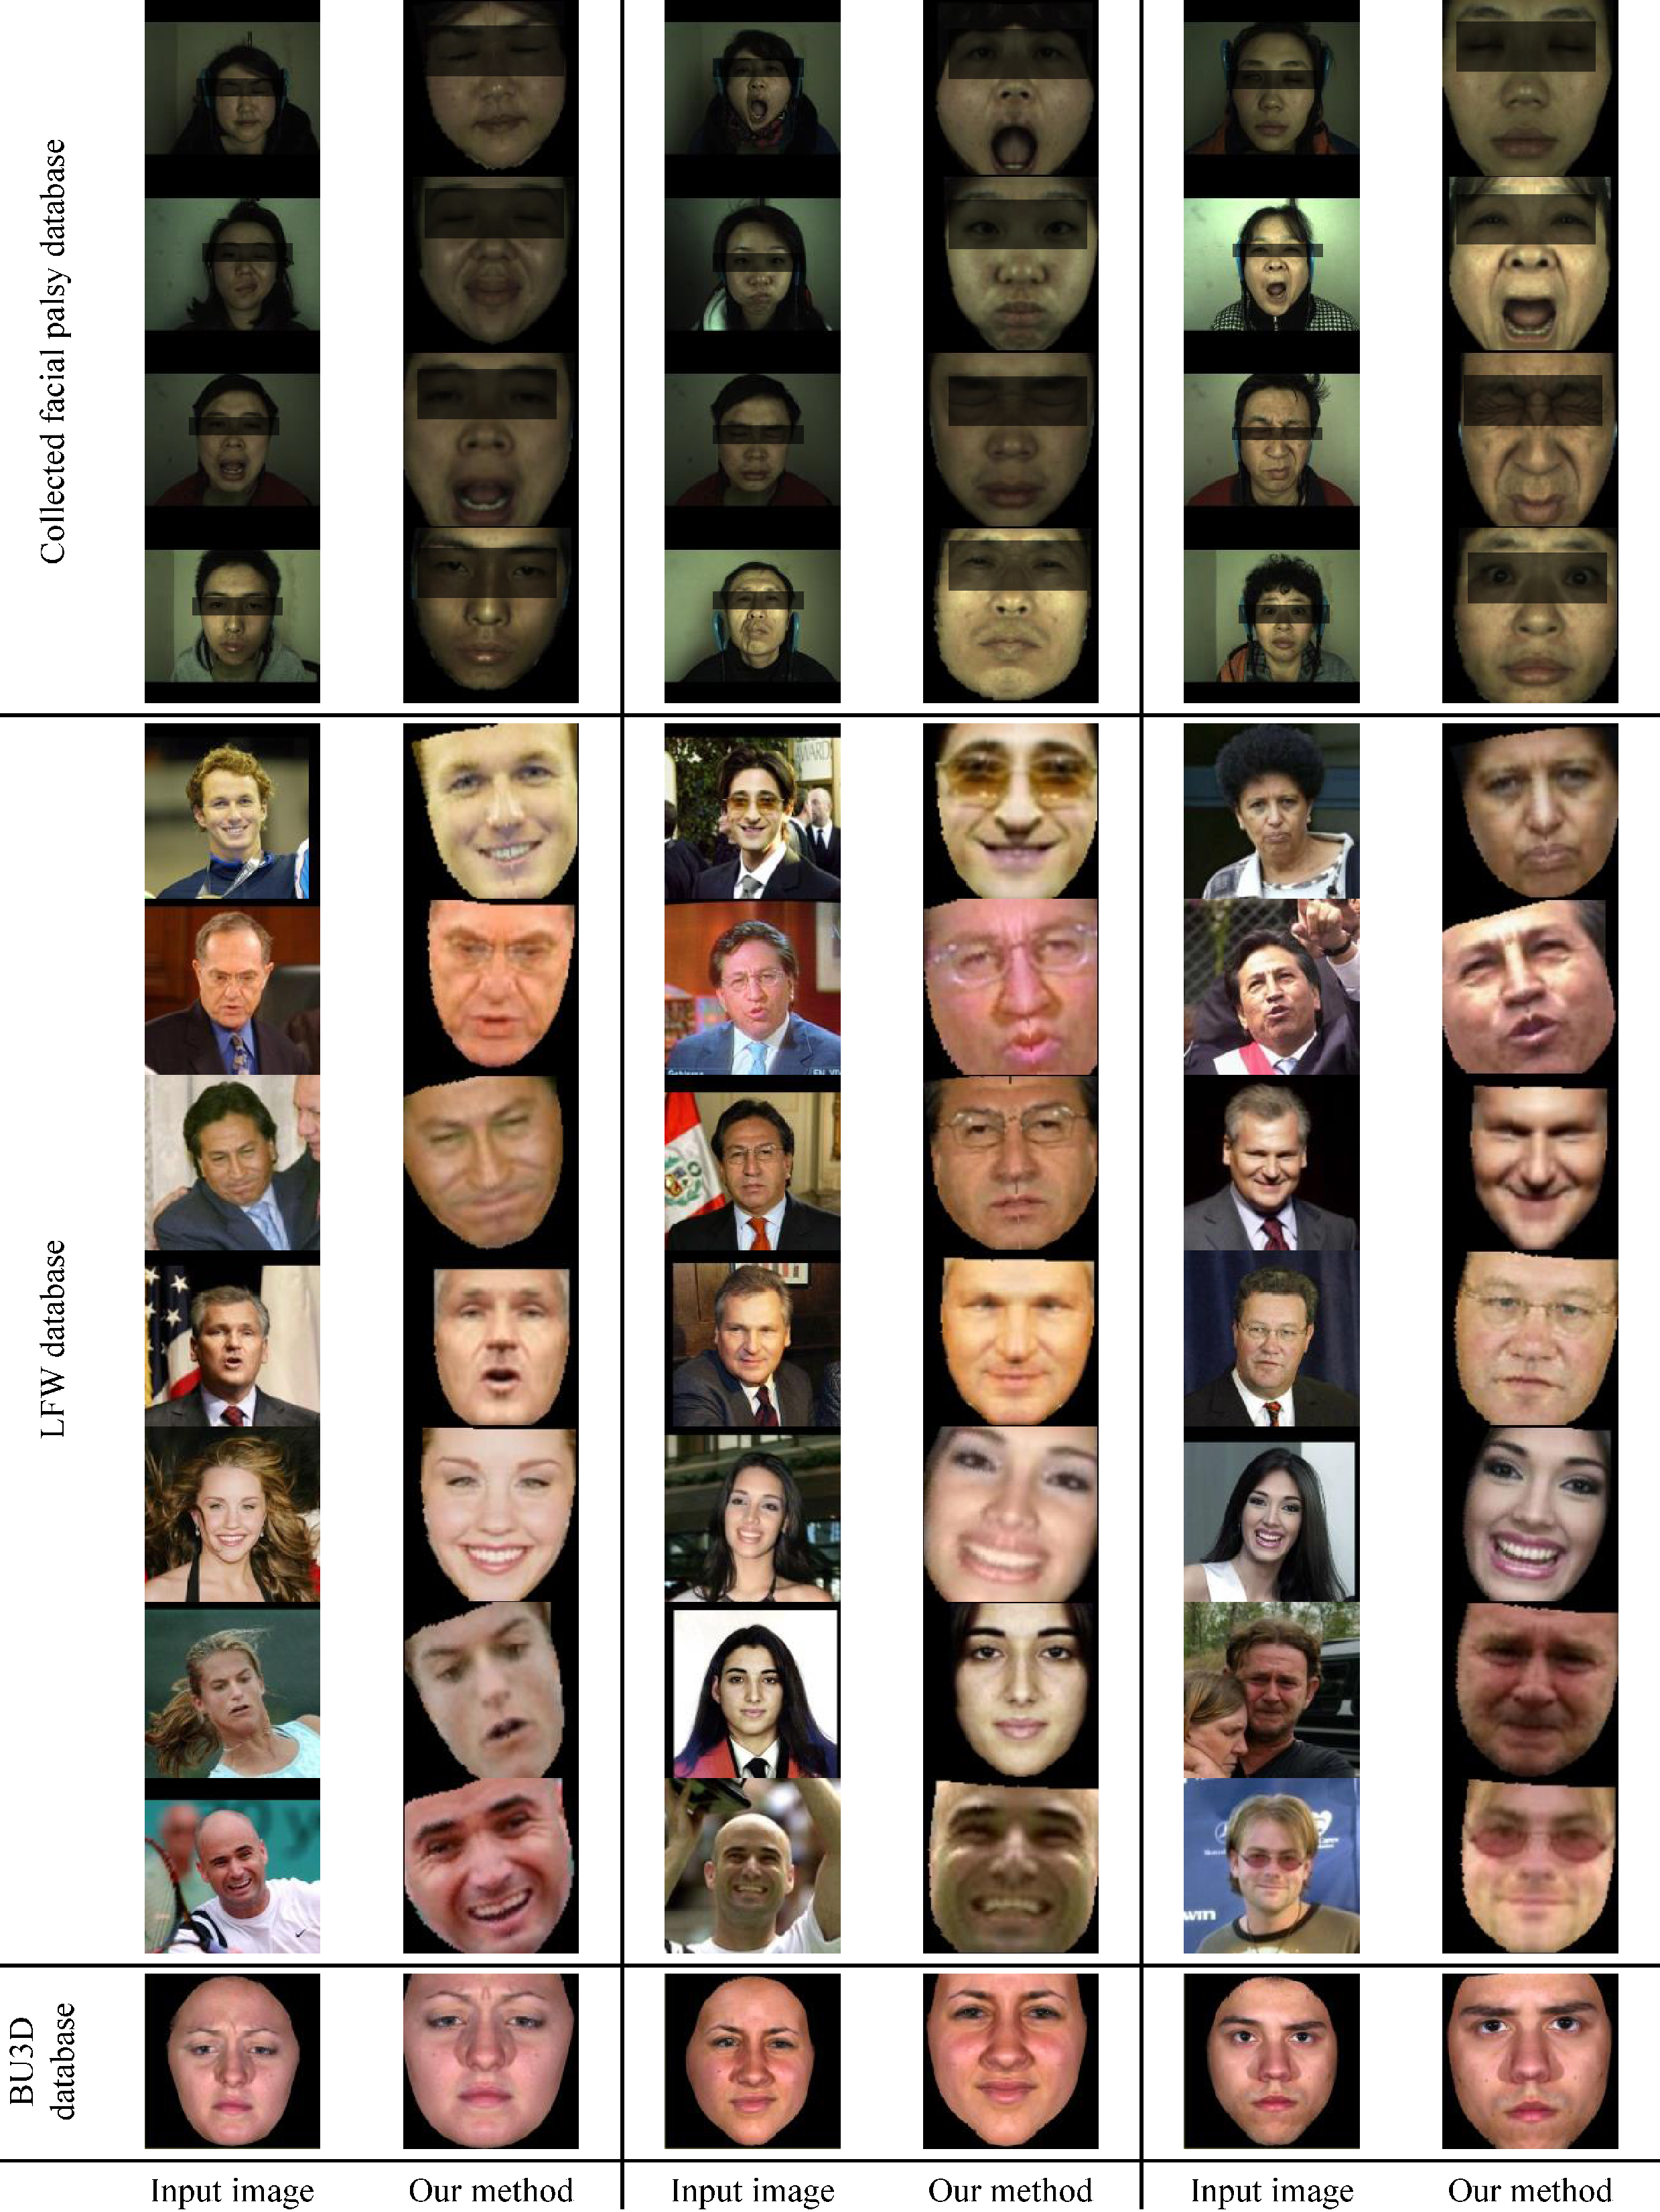 Samples of the experiment results for facial symmetrization on collected facial palsy images, LFW database and BU3D database. It is noticeable that some test examples with large facial performances, head poses or facial occlusions like shades, can be well handled by the proposed model, whereas those conditions can pose more challenges for traditional facial landmark localization based approaches.